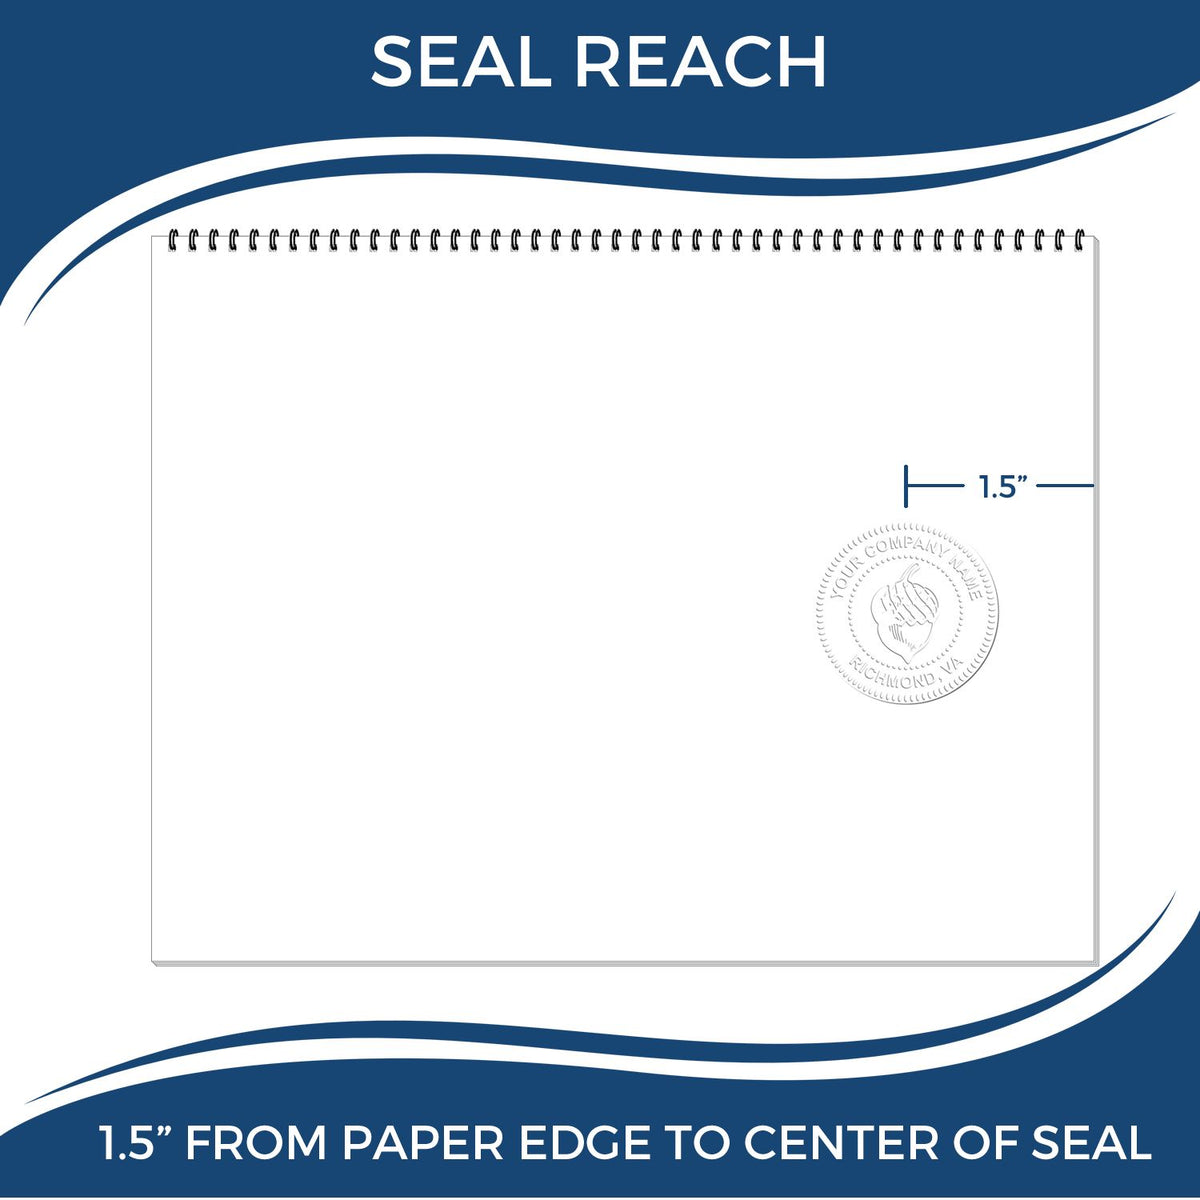 An infographic showing the seal reach which is represented by a ruler and a miniature seal image of the Gift Iowa Engineer Seal